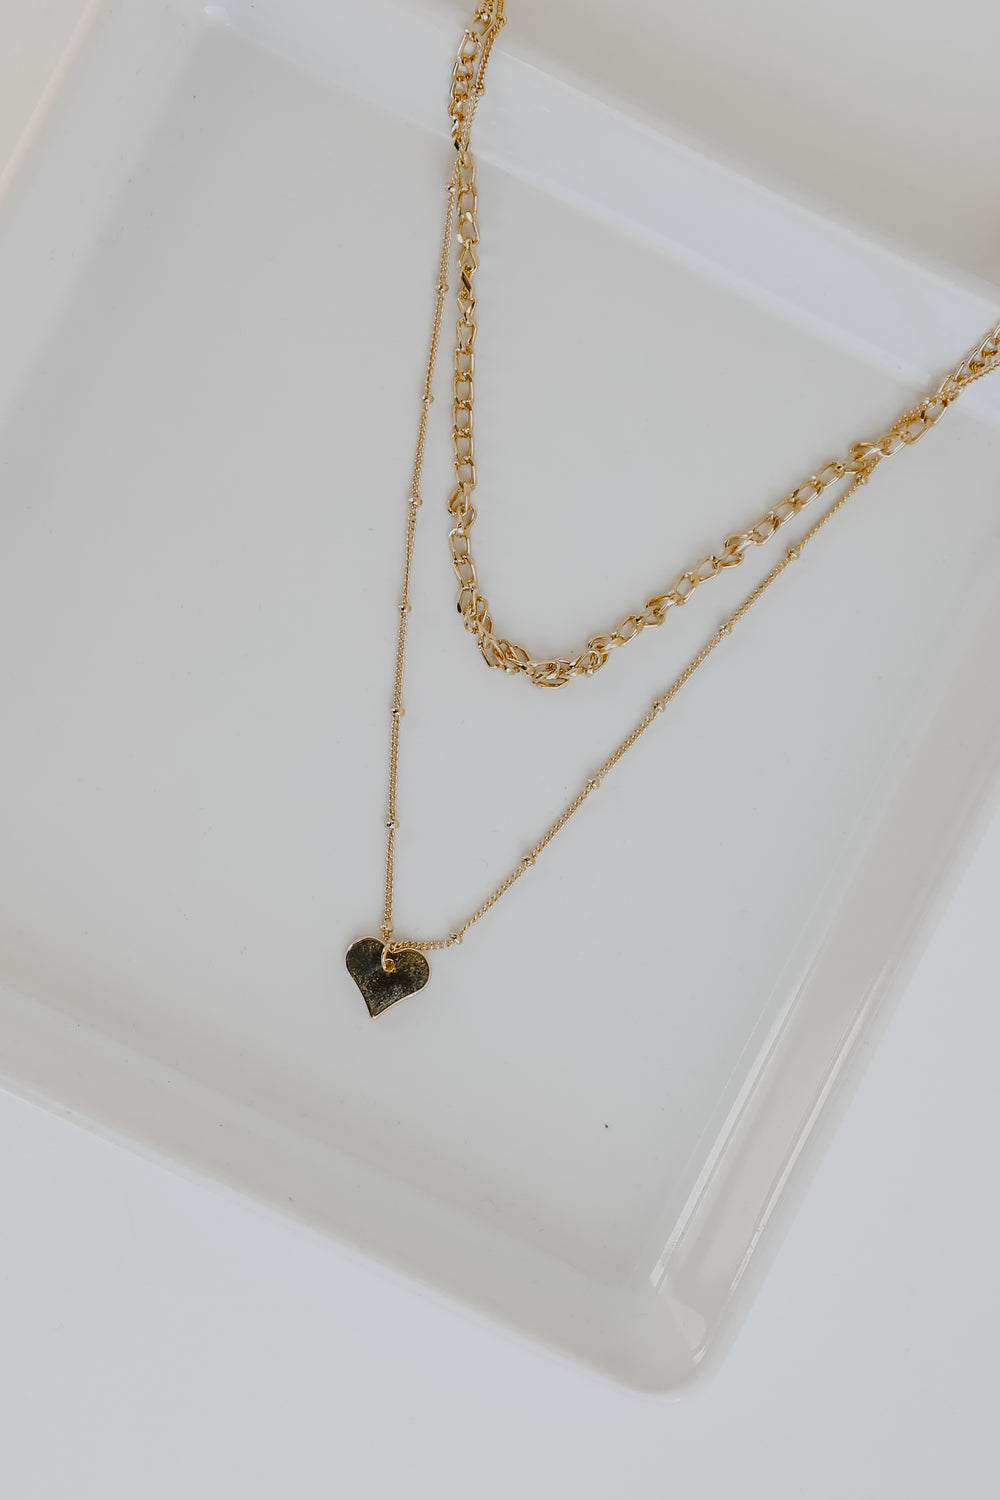 Gold Heart Layered Necklace from dress up